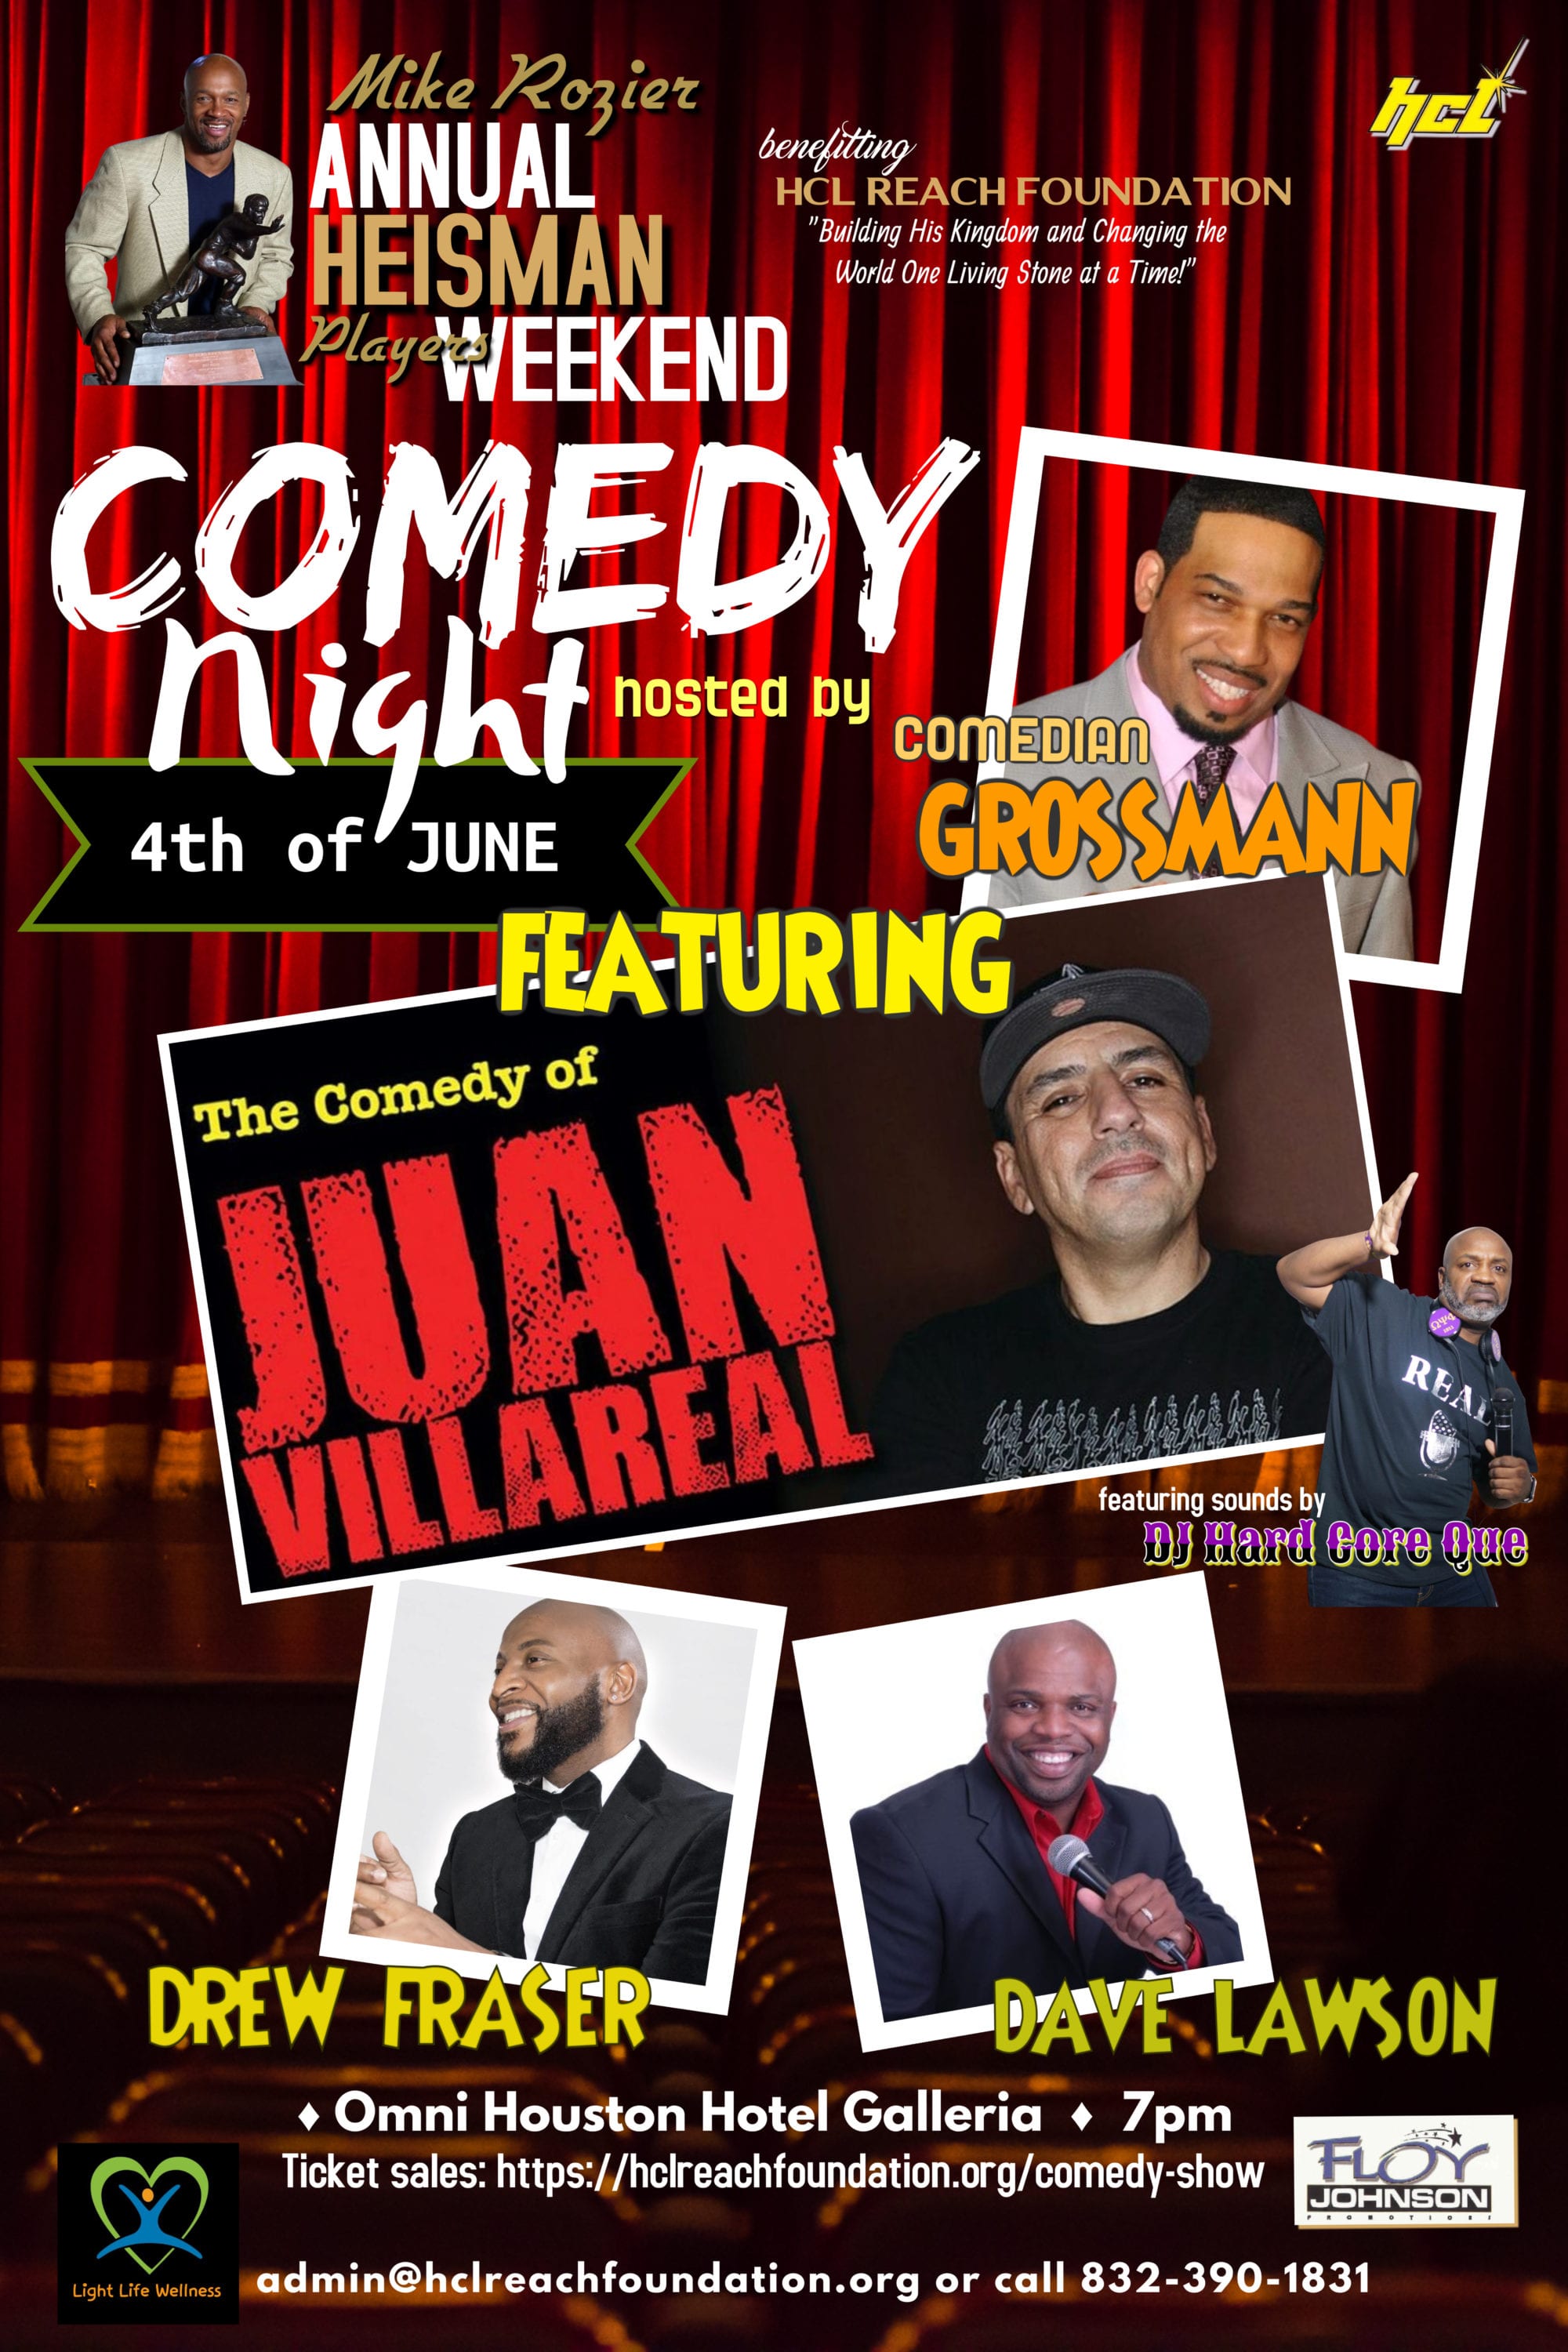 2021 Mike Rozier Heisman Players Weekend Comedy Night Flyer 